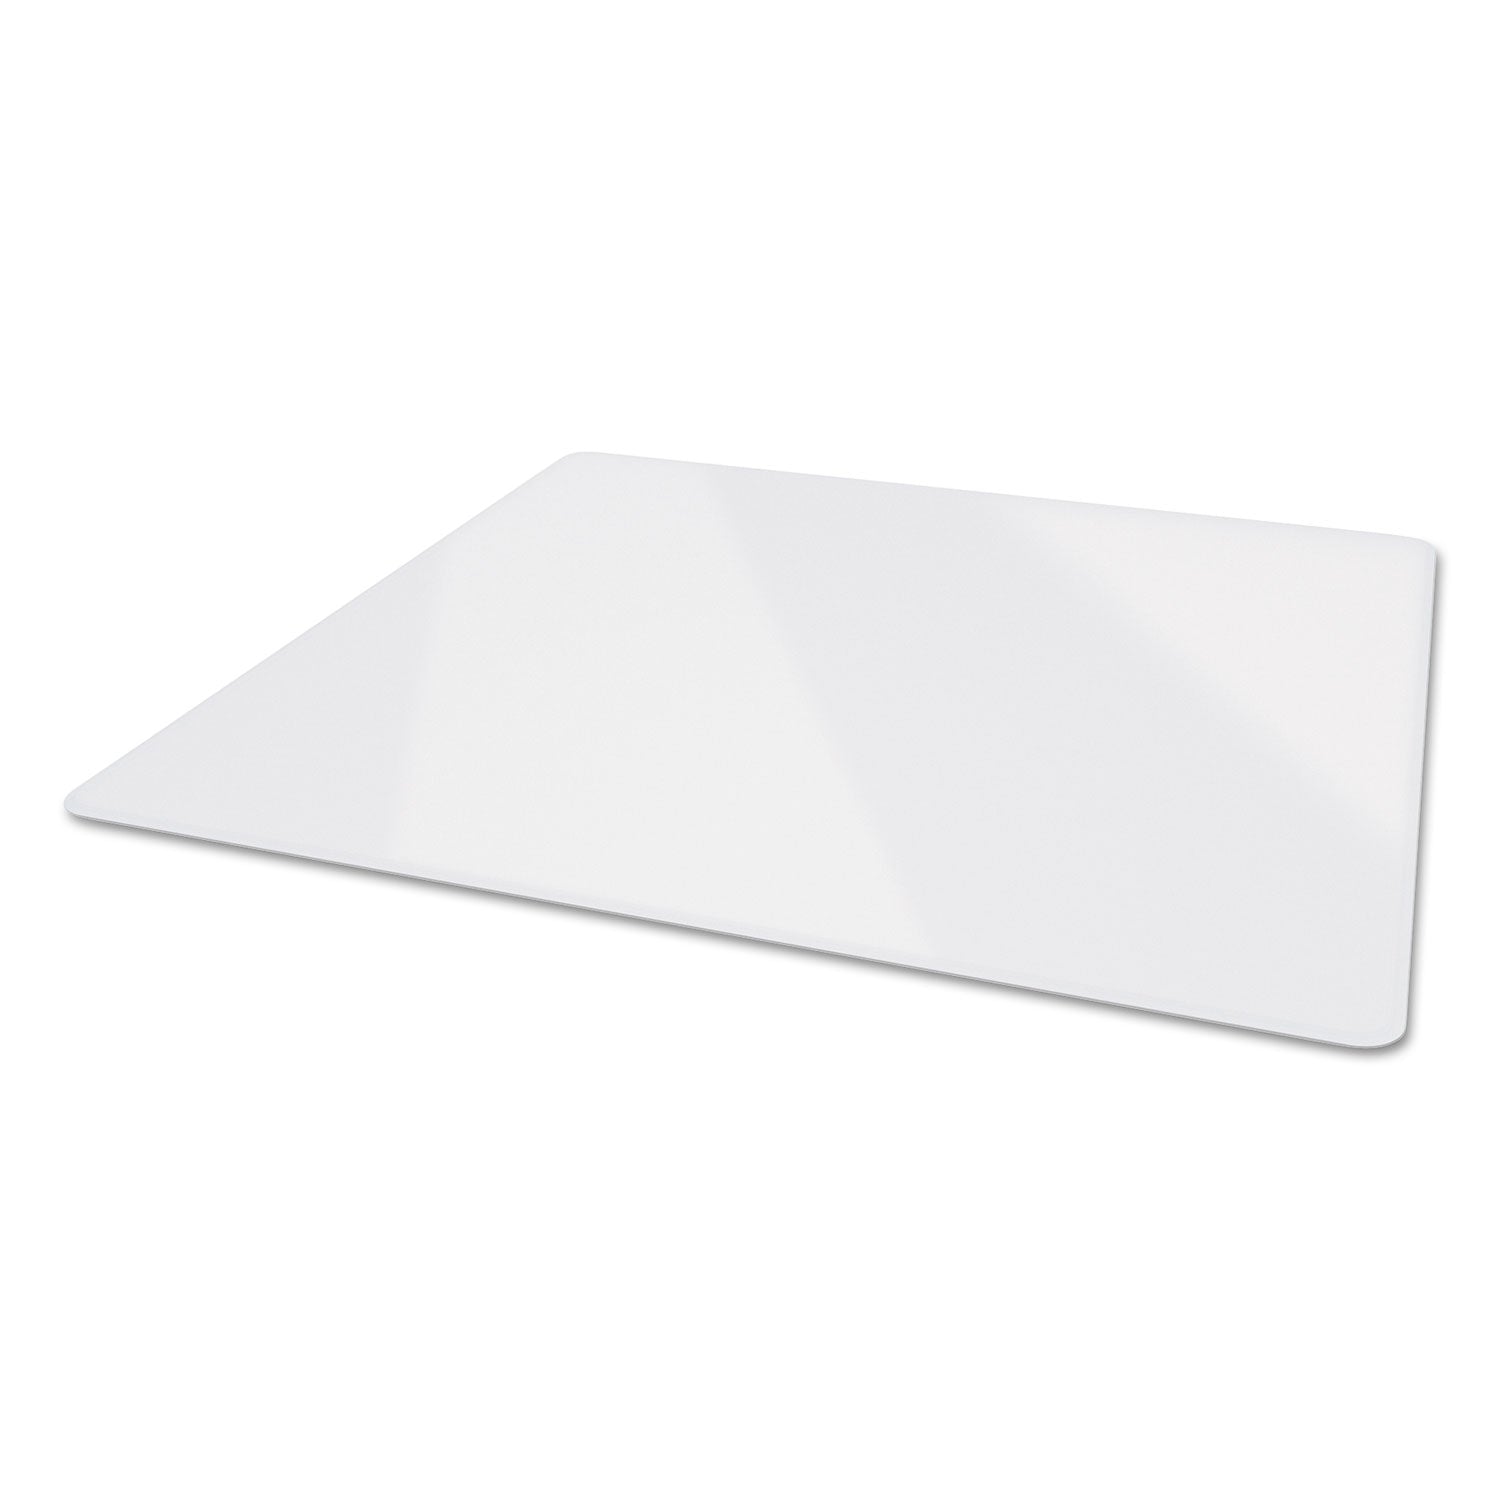 premium-glass-all-day-use-chair-mat--all-floor-types-44-x-50-rectangular-clear_defcmg70434450 - 3